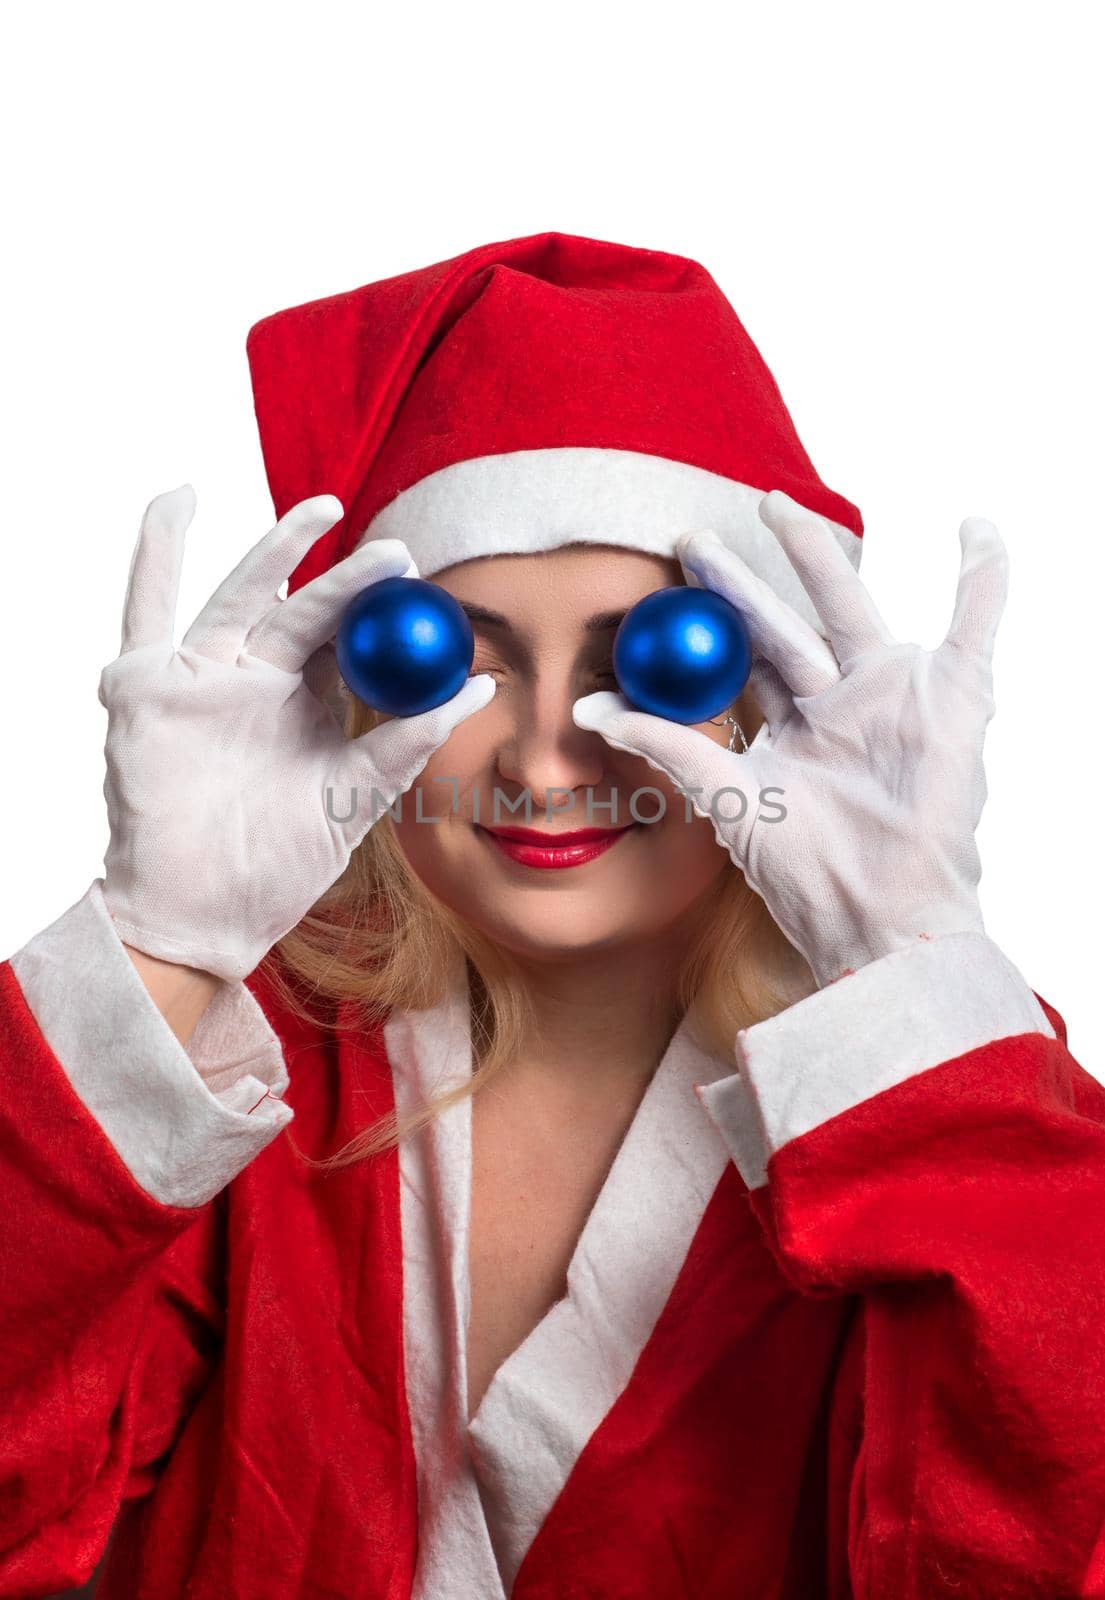 Girl in Santa suit holding in his hands balls near the eyes, on a white background